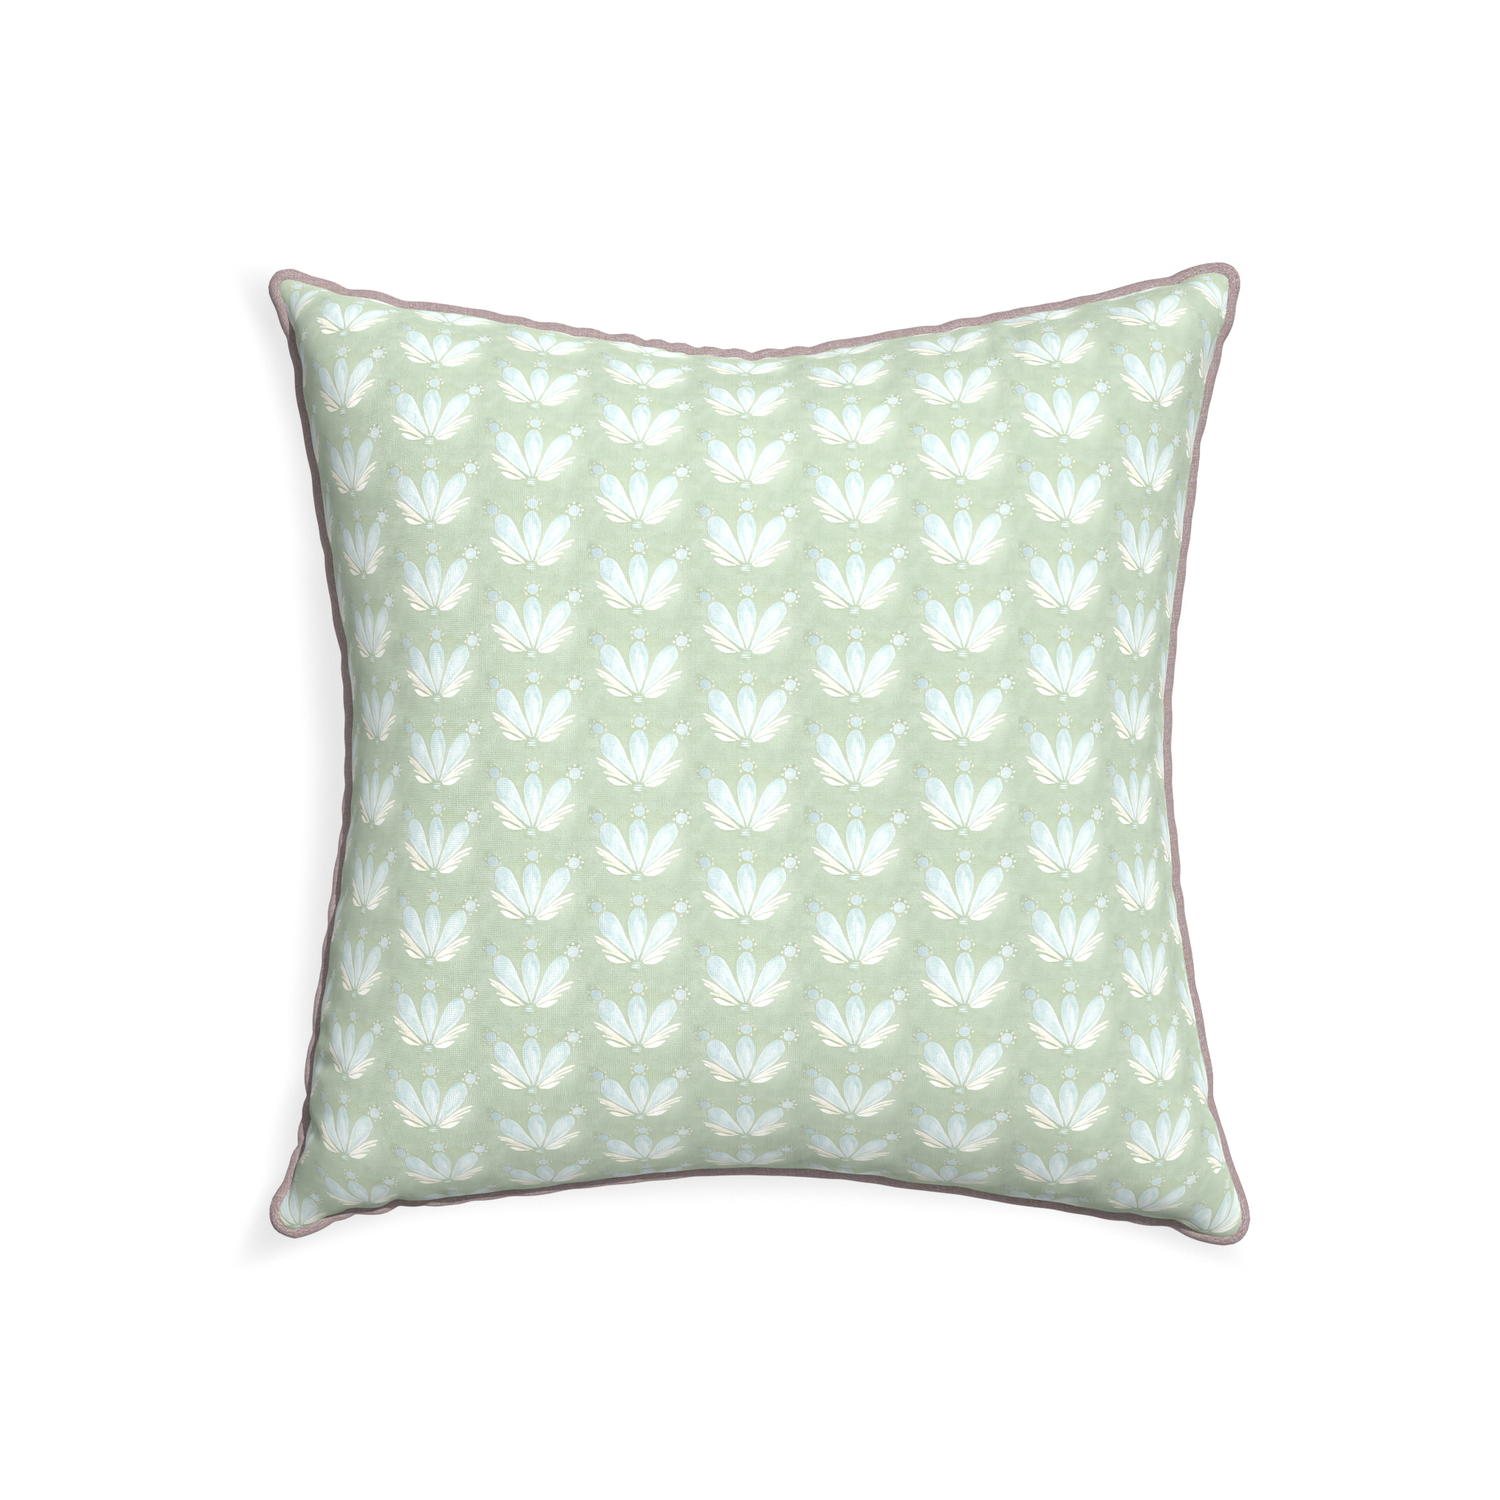 22-square serena sea salt custom blue & green floral drop repeatpillow with orchid piping on white background